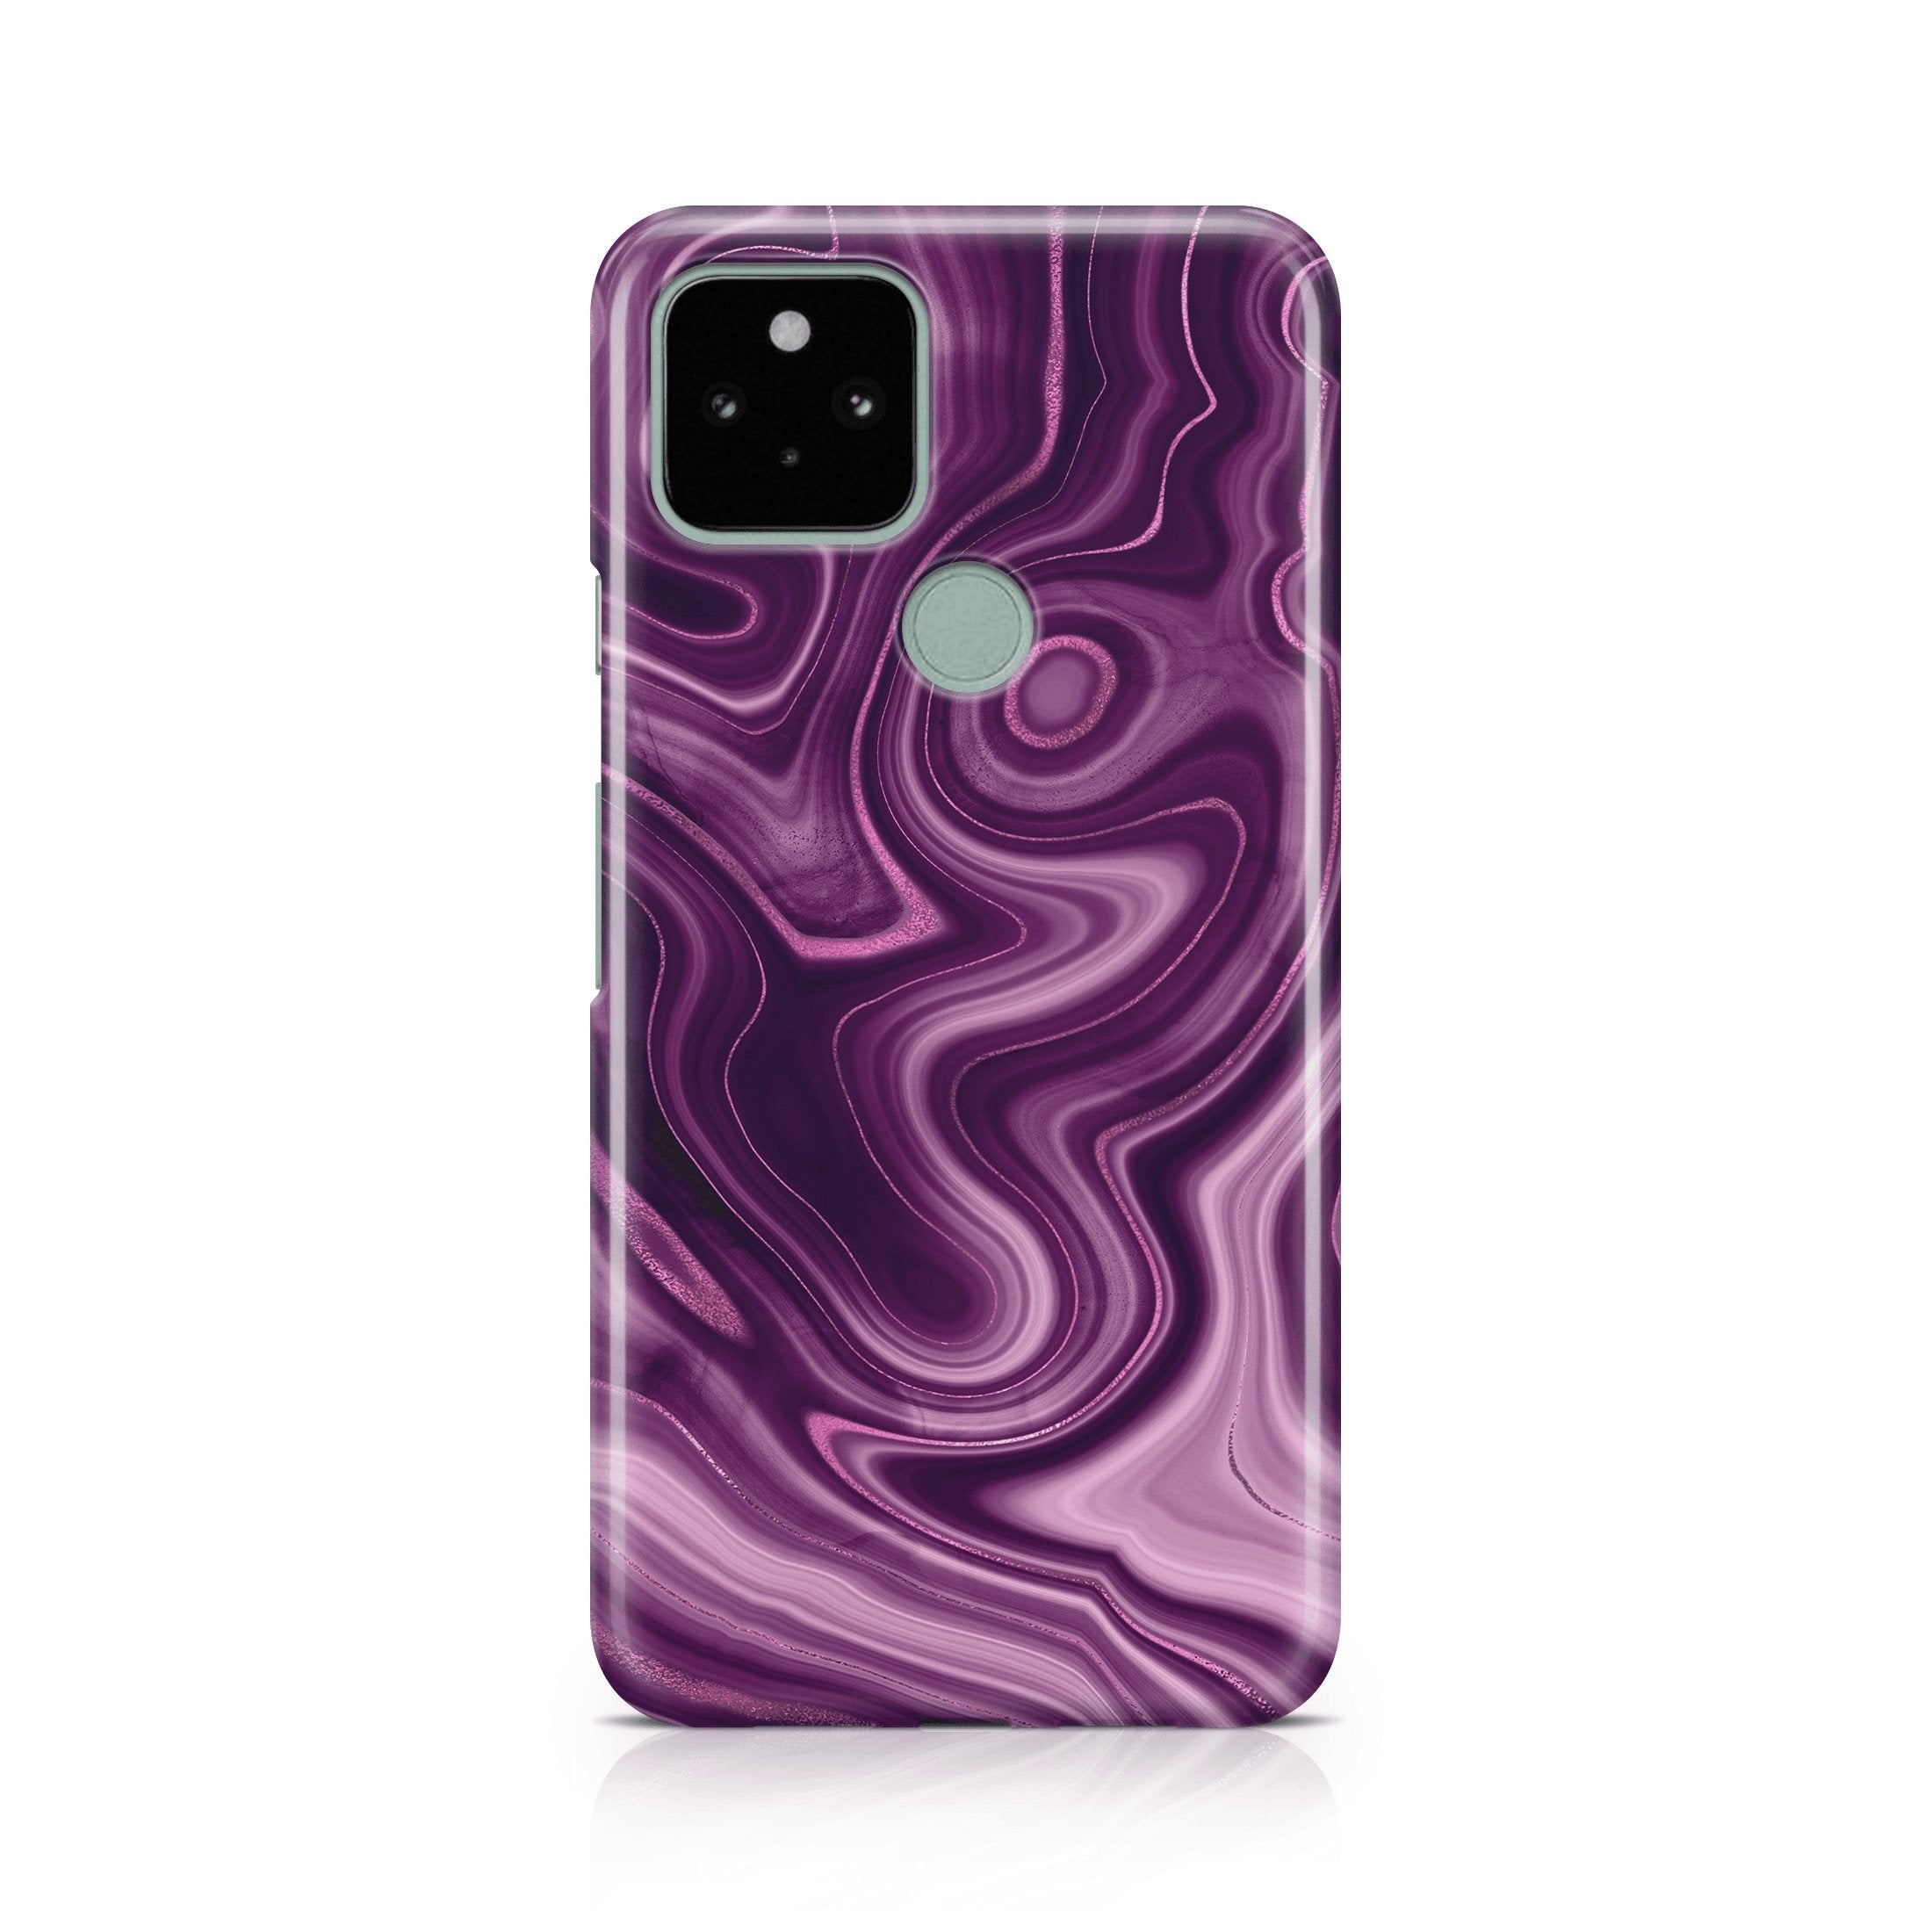 Amethyst Strata II - Google phone case designs by CaseSwagger